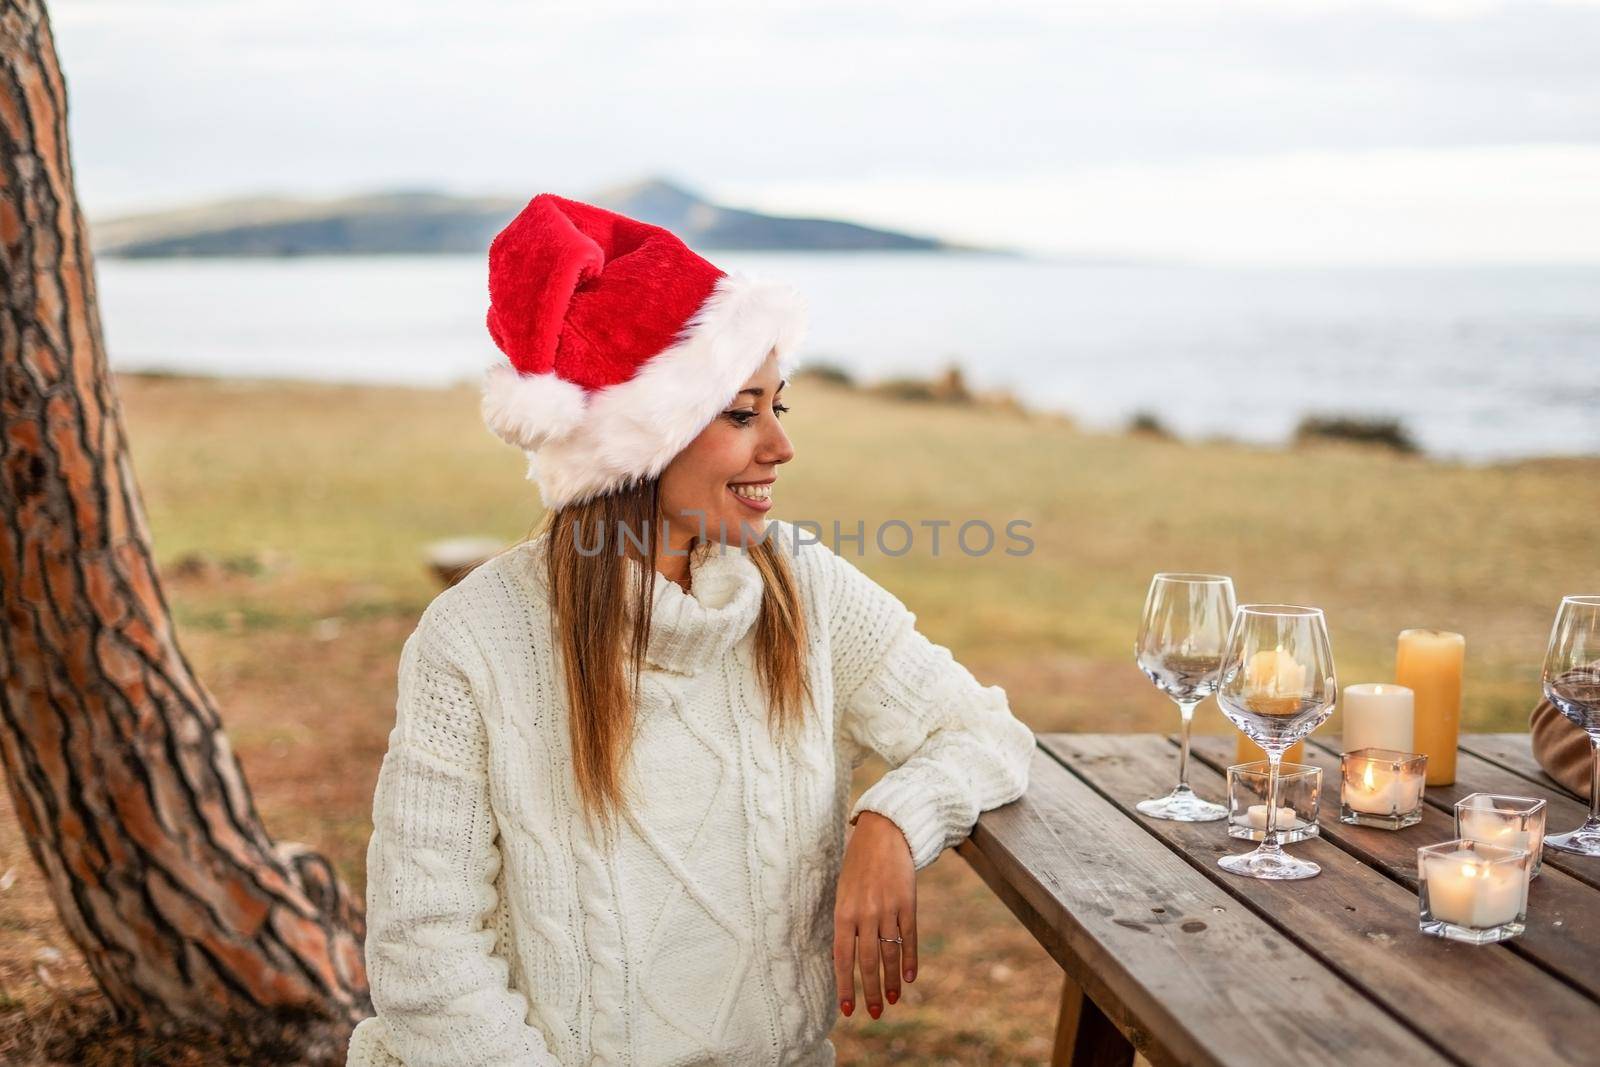 Beautiful young woman smiling sitting outdoor at a wooden table posing with Santa Klaus hat and white wool sweater watching empty glasses before toast for celebrating holidays in sea winter vacation by robbyfontanesi